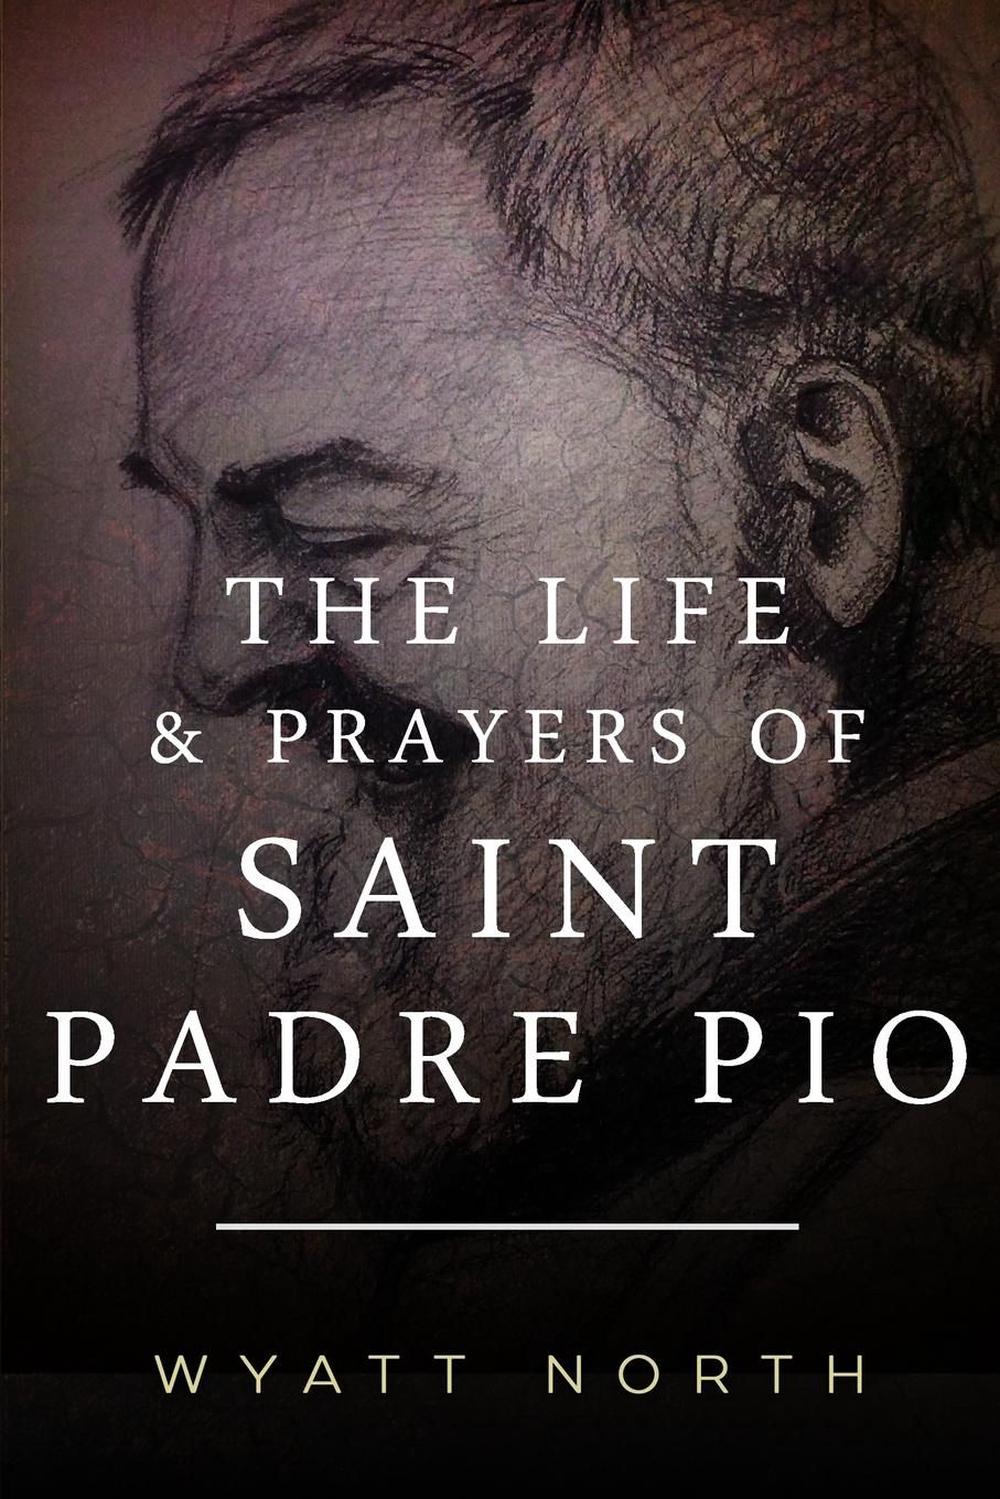 The Life and Prayers of Saint Padre Pio by Wyatt North (English) Paperback Book  - Photo 1/1